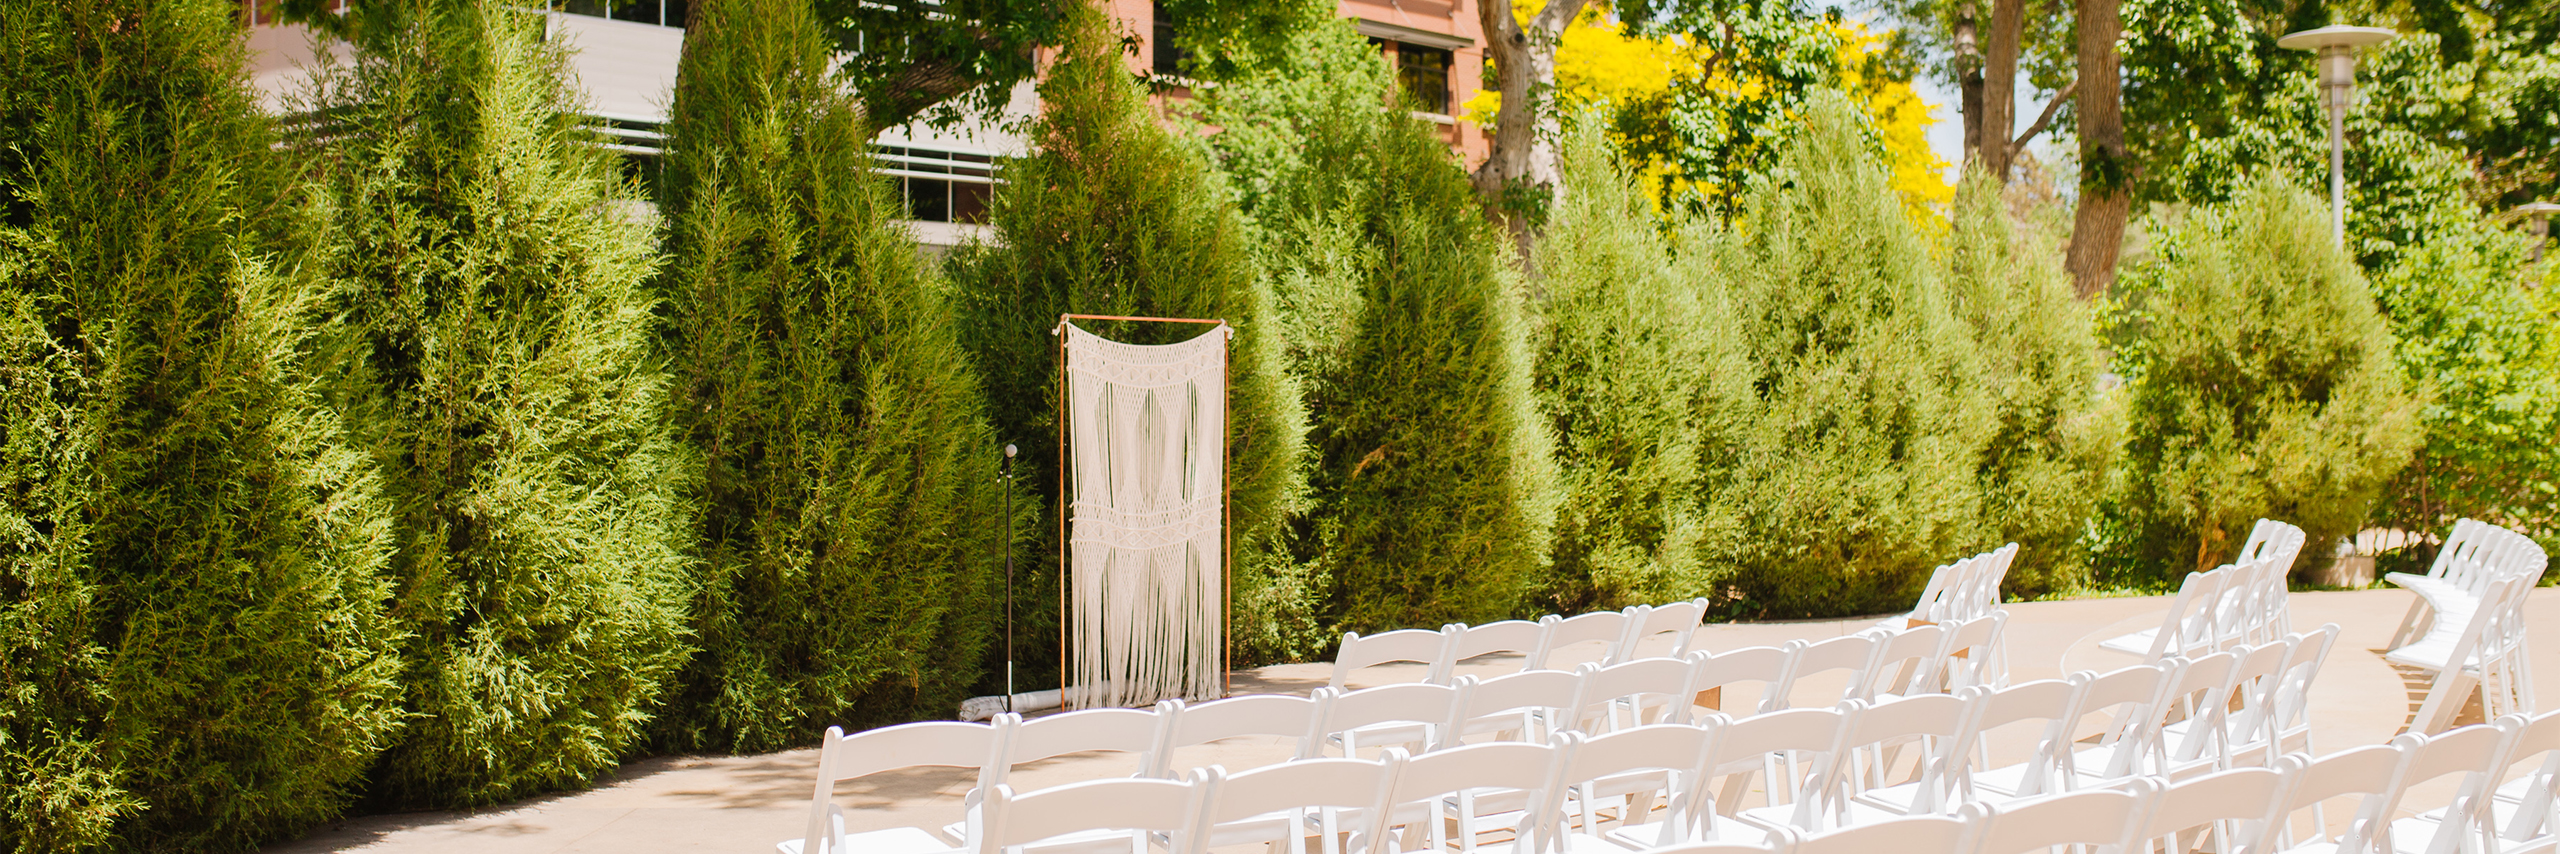 White chairs appear in rows for a wedding ceremony on the Terrace.